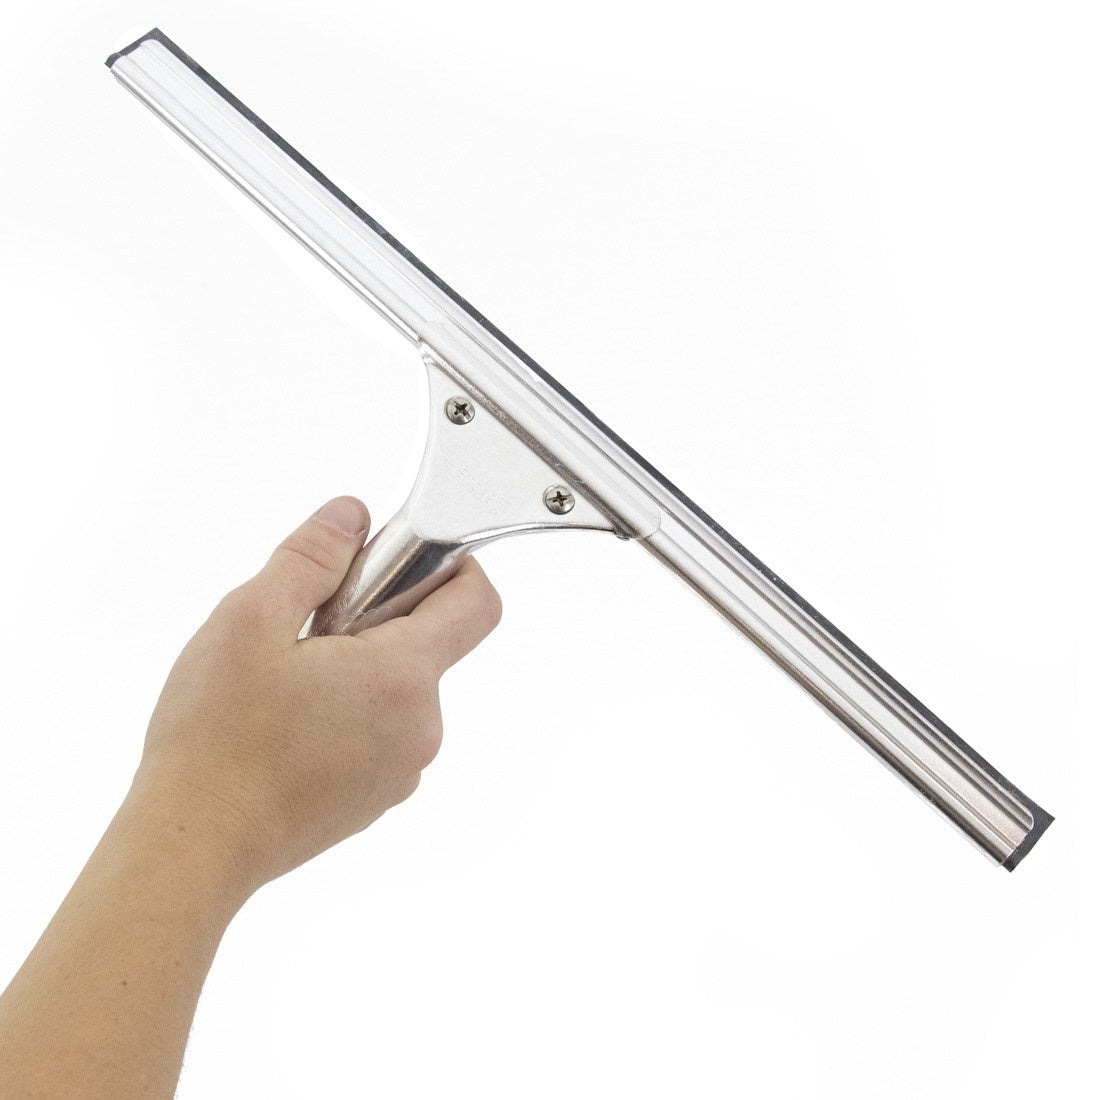 Command Bath Squeegee Metal Cleaning Tools And Accessories, Stainless Steel